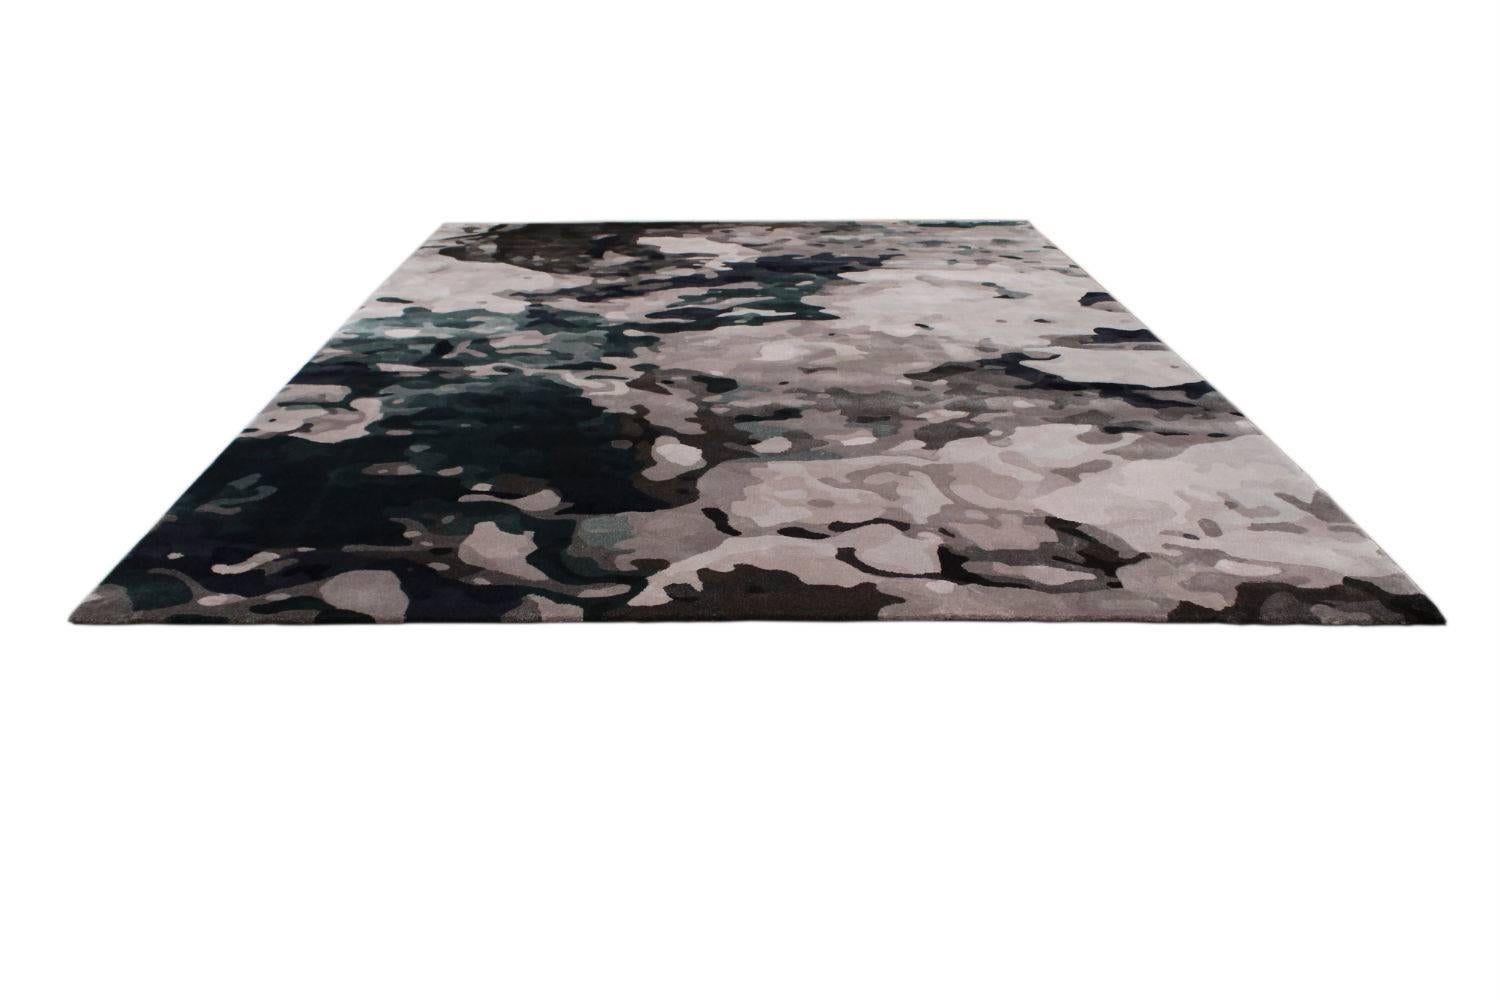 Fortuny Green Velvet rug created by Cristina Jorge de Carvalho from the Fortuny Collection. A collection Inspired on the historical walls of Venezian Fortuny Palazzo, capturing the color deterioration over time.
Handmade in Portugal by the most